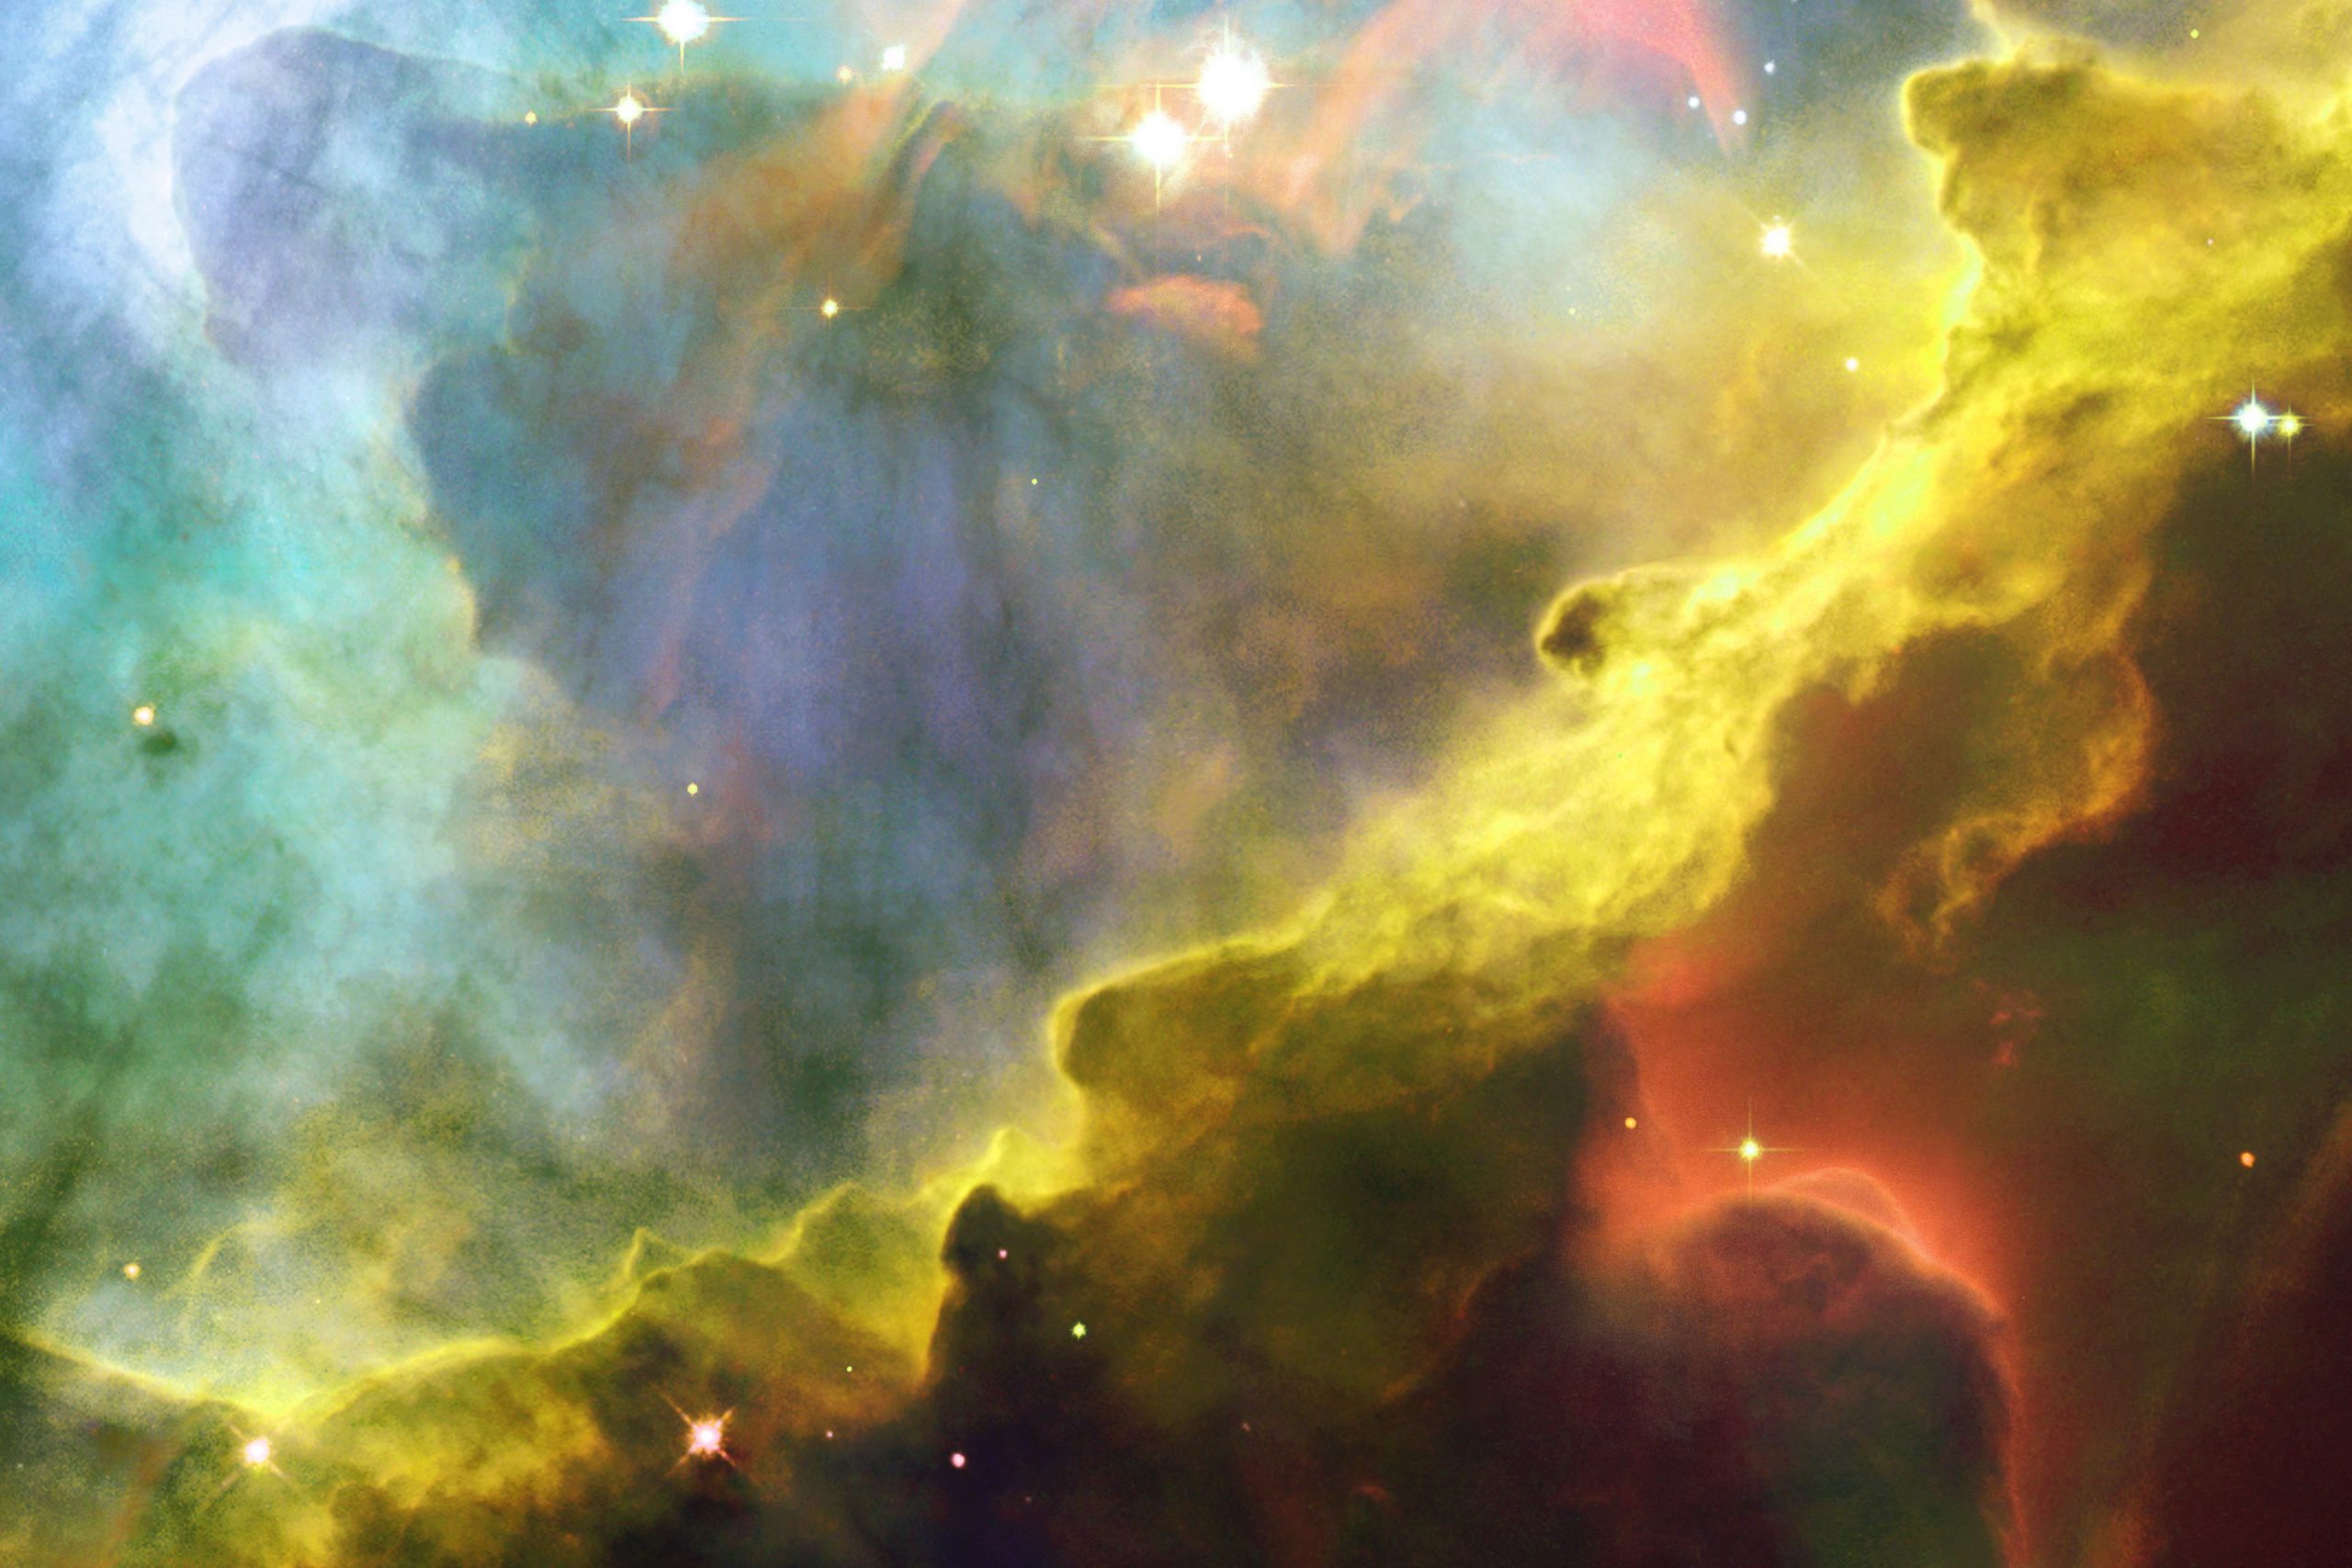 The Omega Nebula or Swan Nebula in outer space. Depositphotos.